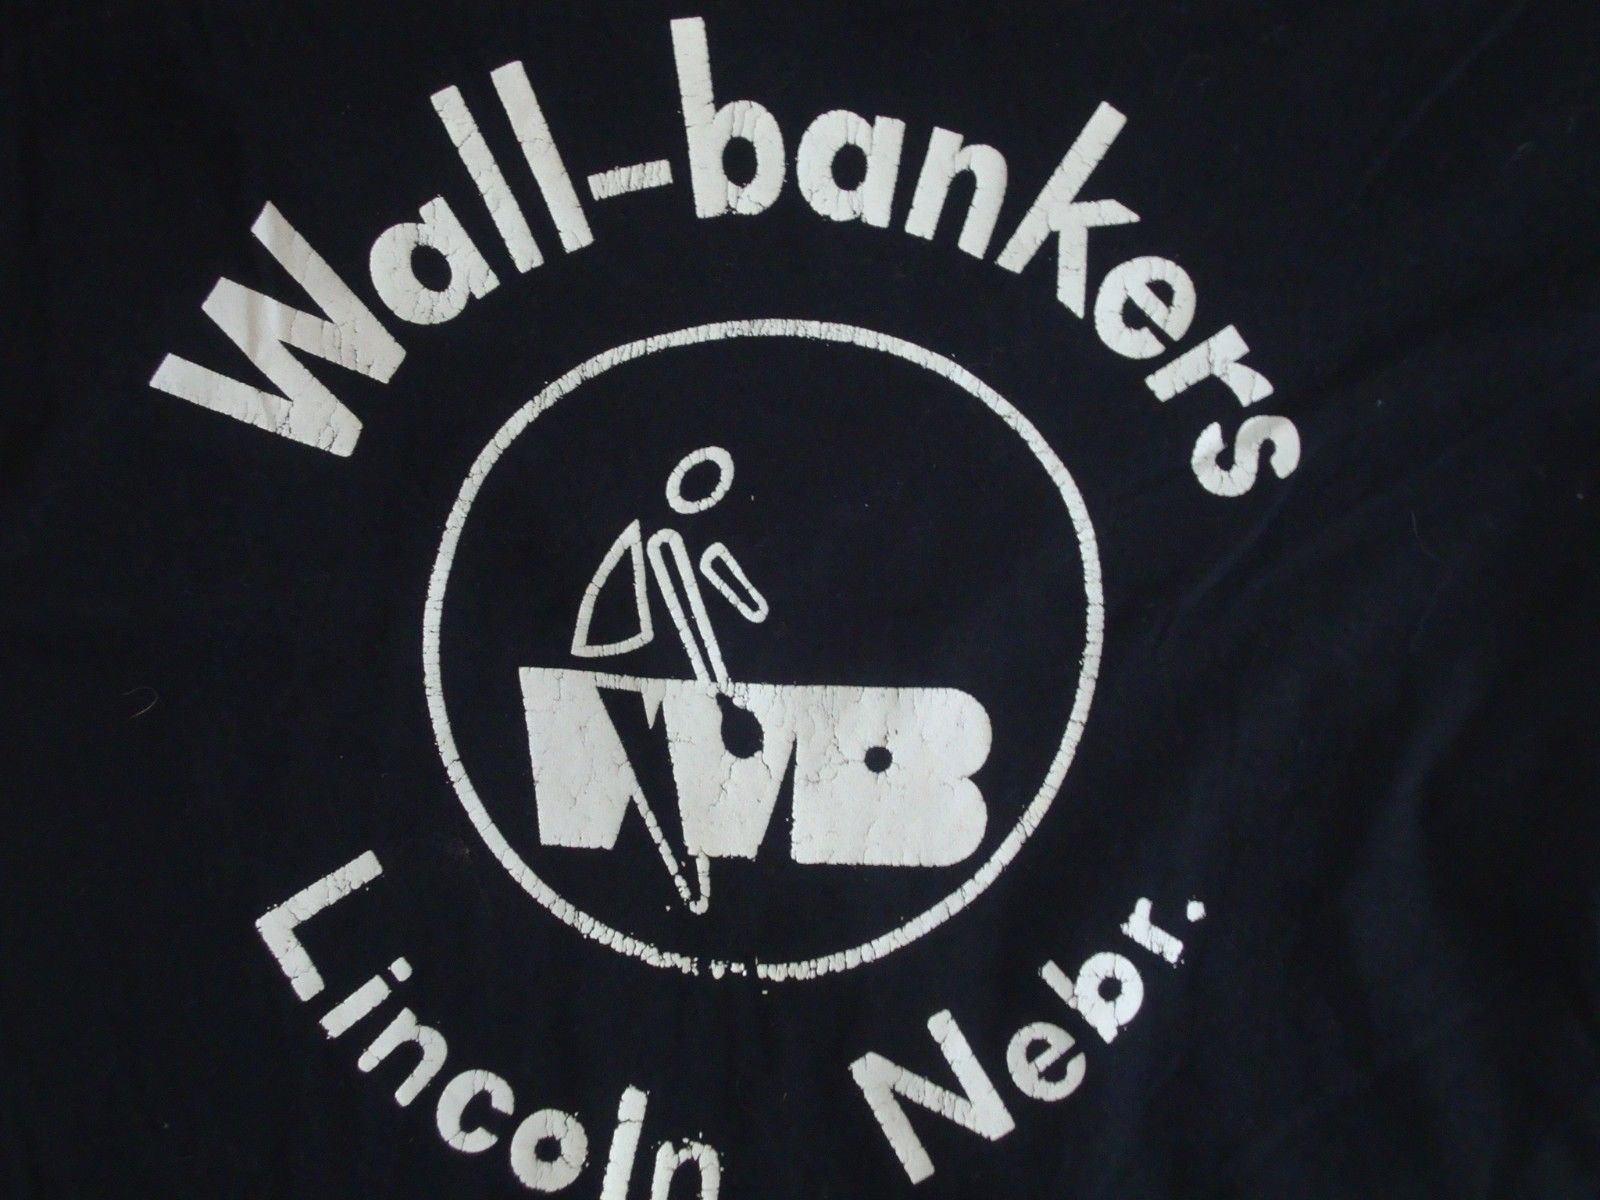 Primary image for Vintage Wall Bankers Lincoln Nebraska vacation Tourist T Shirt M